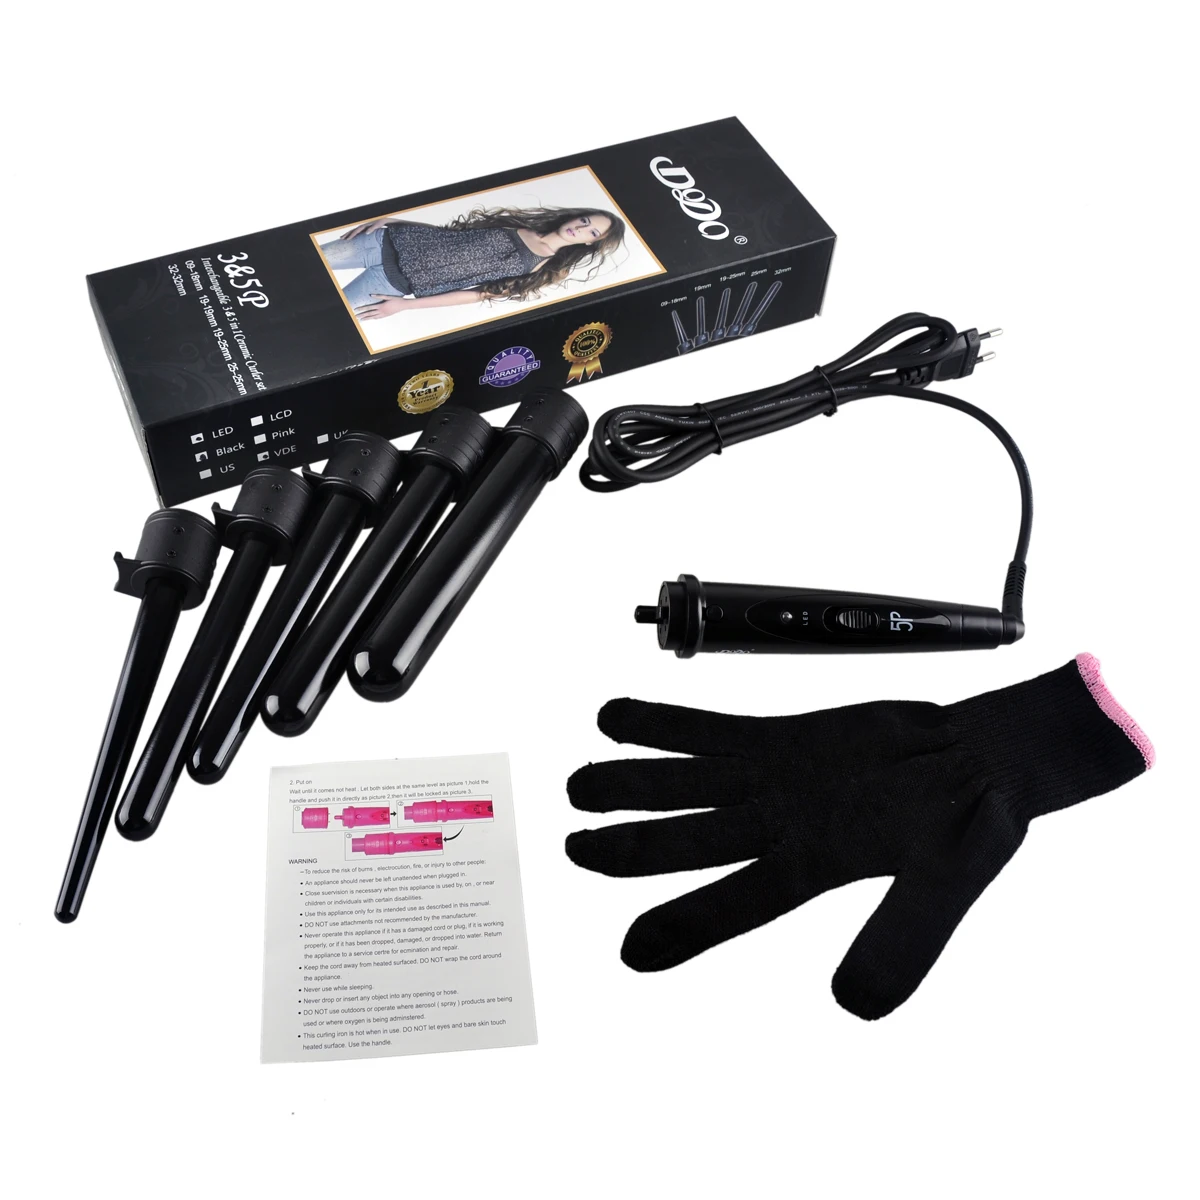 09-32mm Pro Series 5 in 1 Curling Wand Set Hair Curling Tong 5pcs Hair Curling Iron The Wand Hair Curler Roller Gift Set US Plug